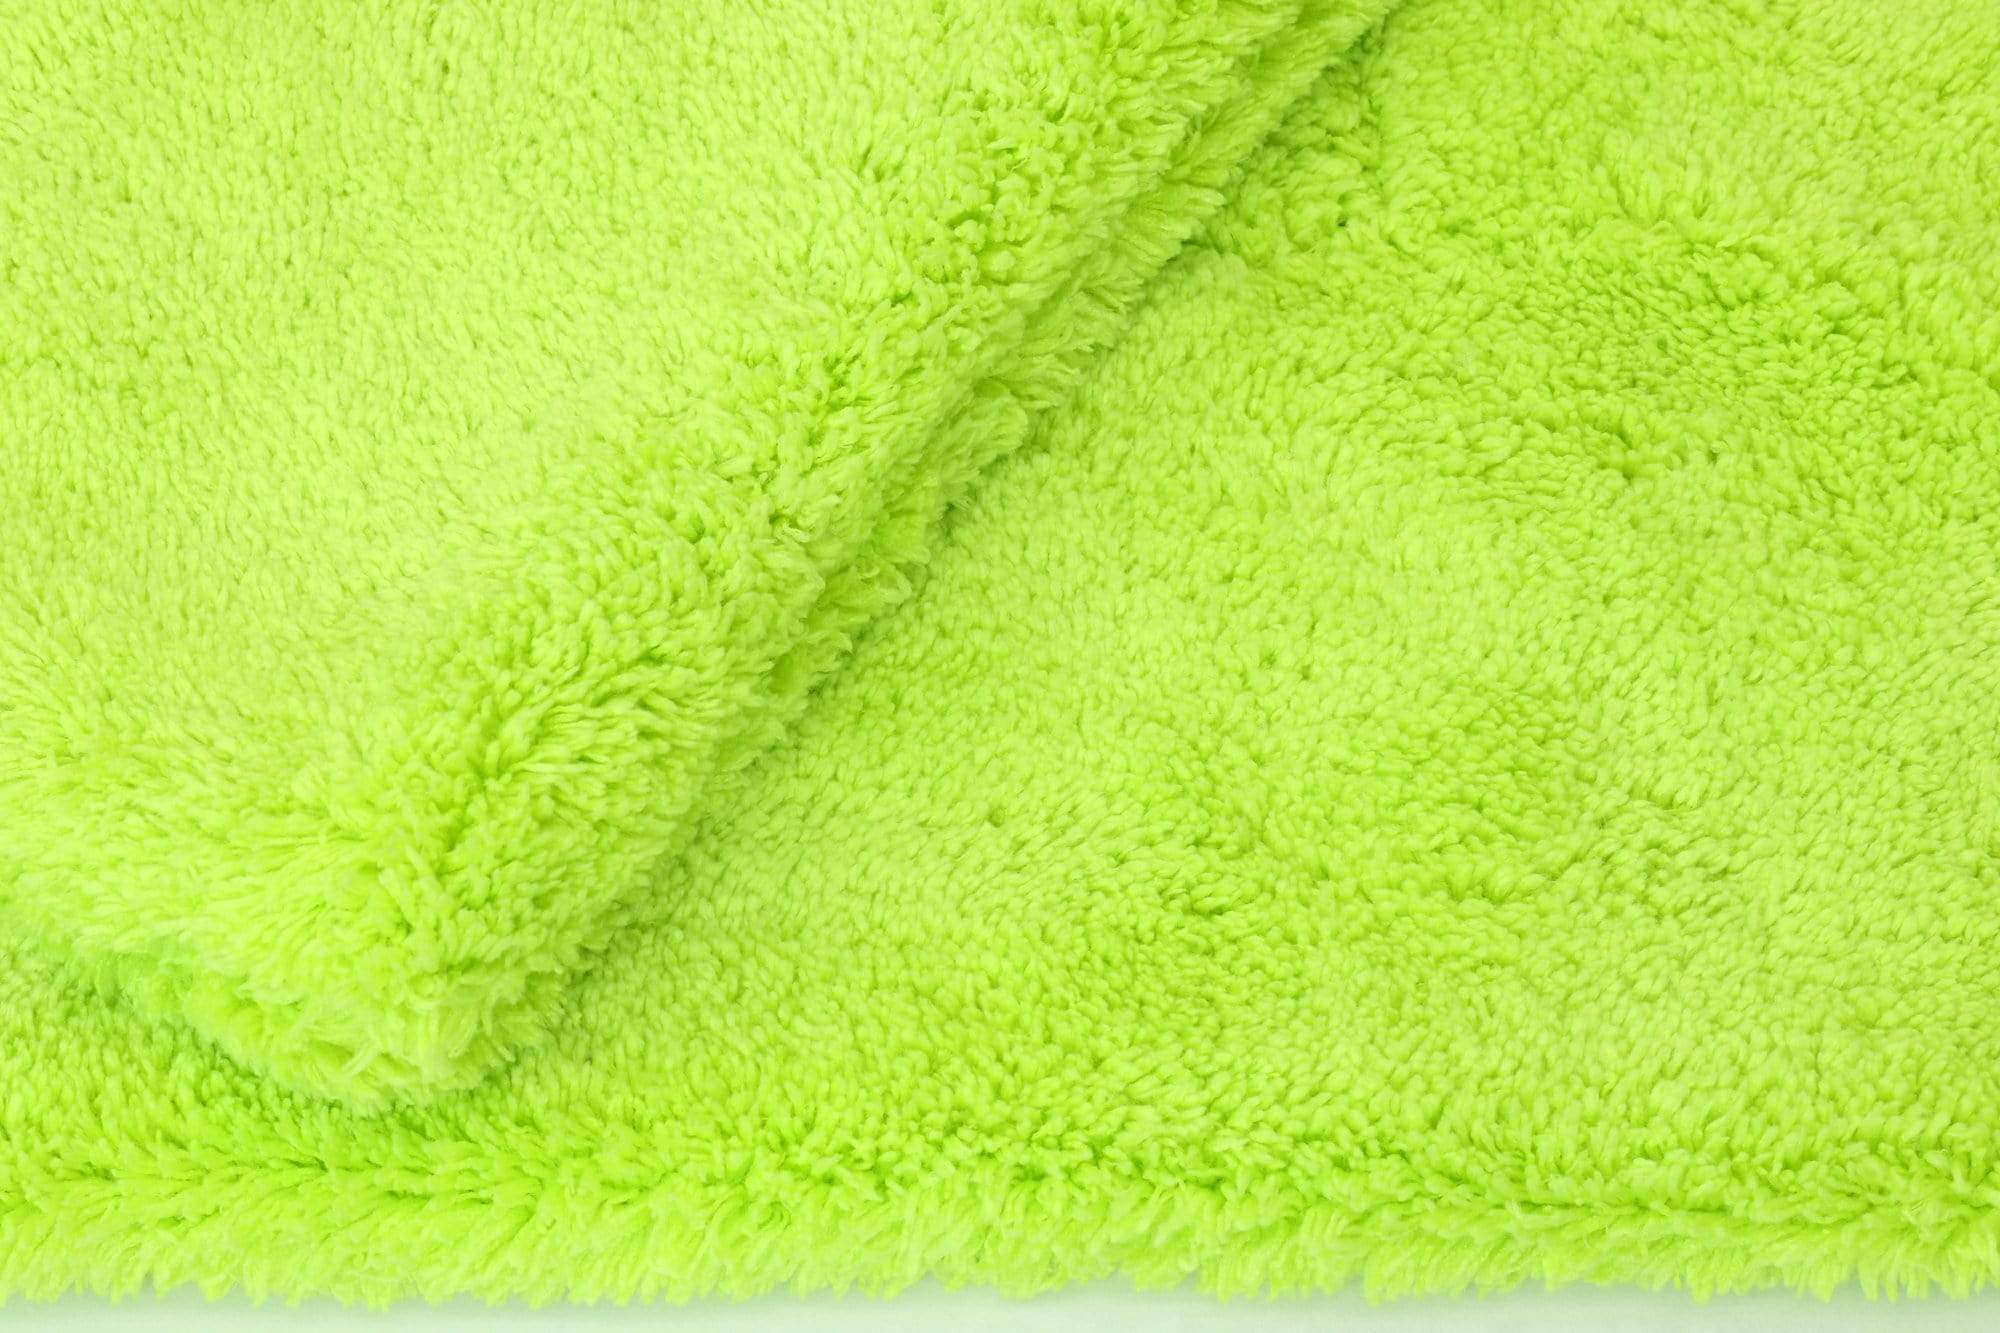 5 Pack - Neighbors Envy XL Microfiber Towels - Extra Large 24 x 60 inch Auto 